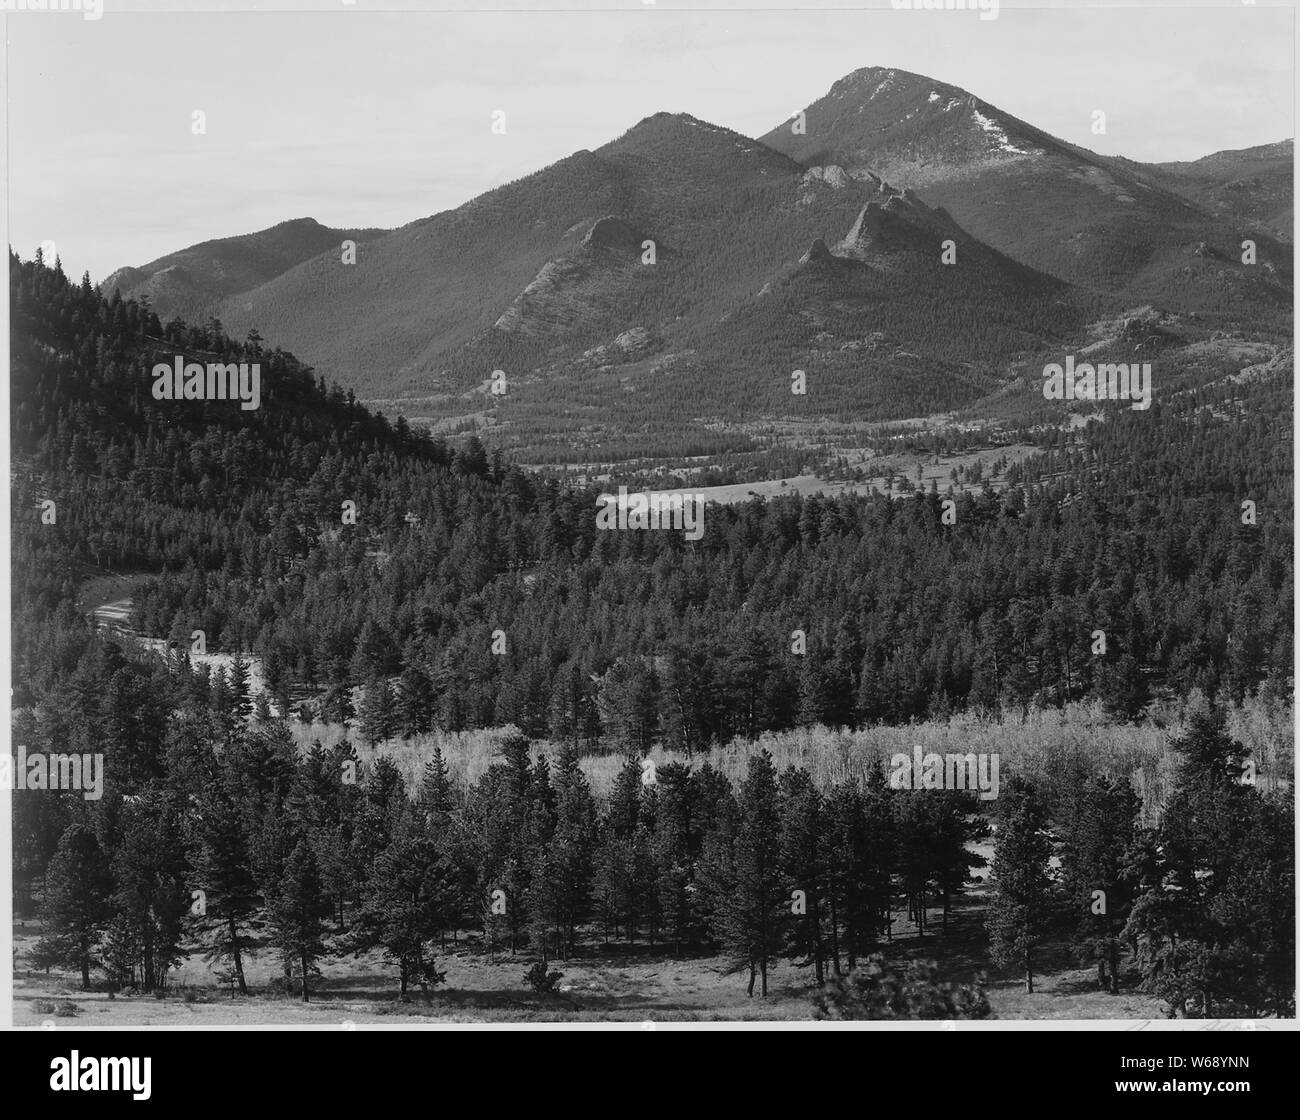 View with trees in foreground, barren mountains in background, In Rocky Mountain National Park, Colorado, 1933 - 1942 Stock Photo